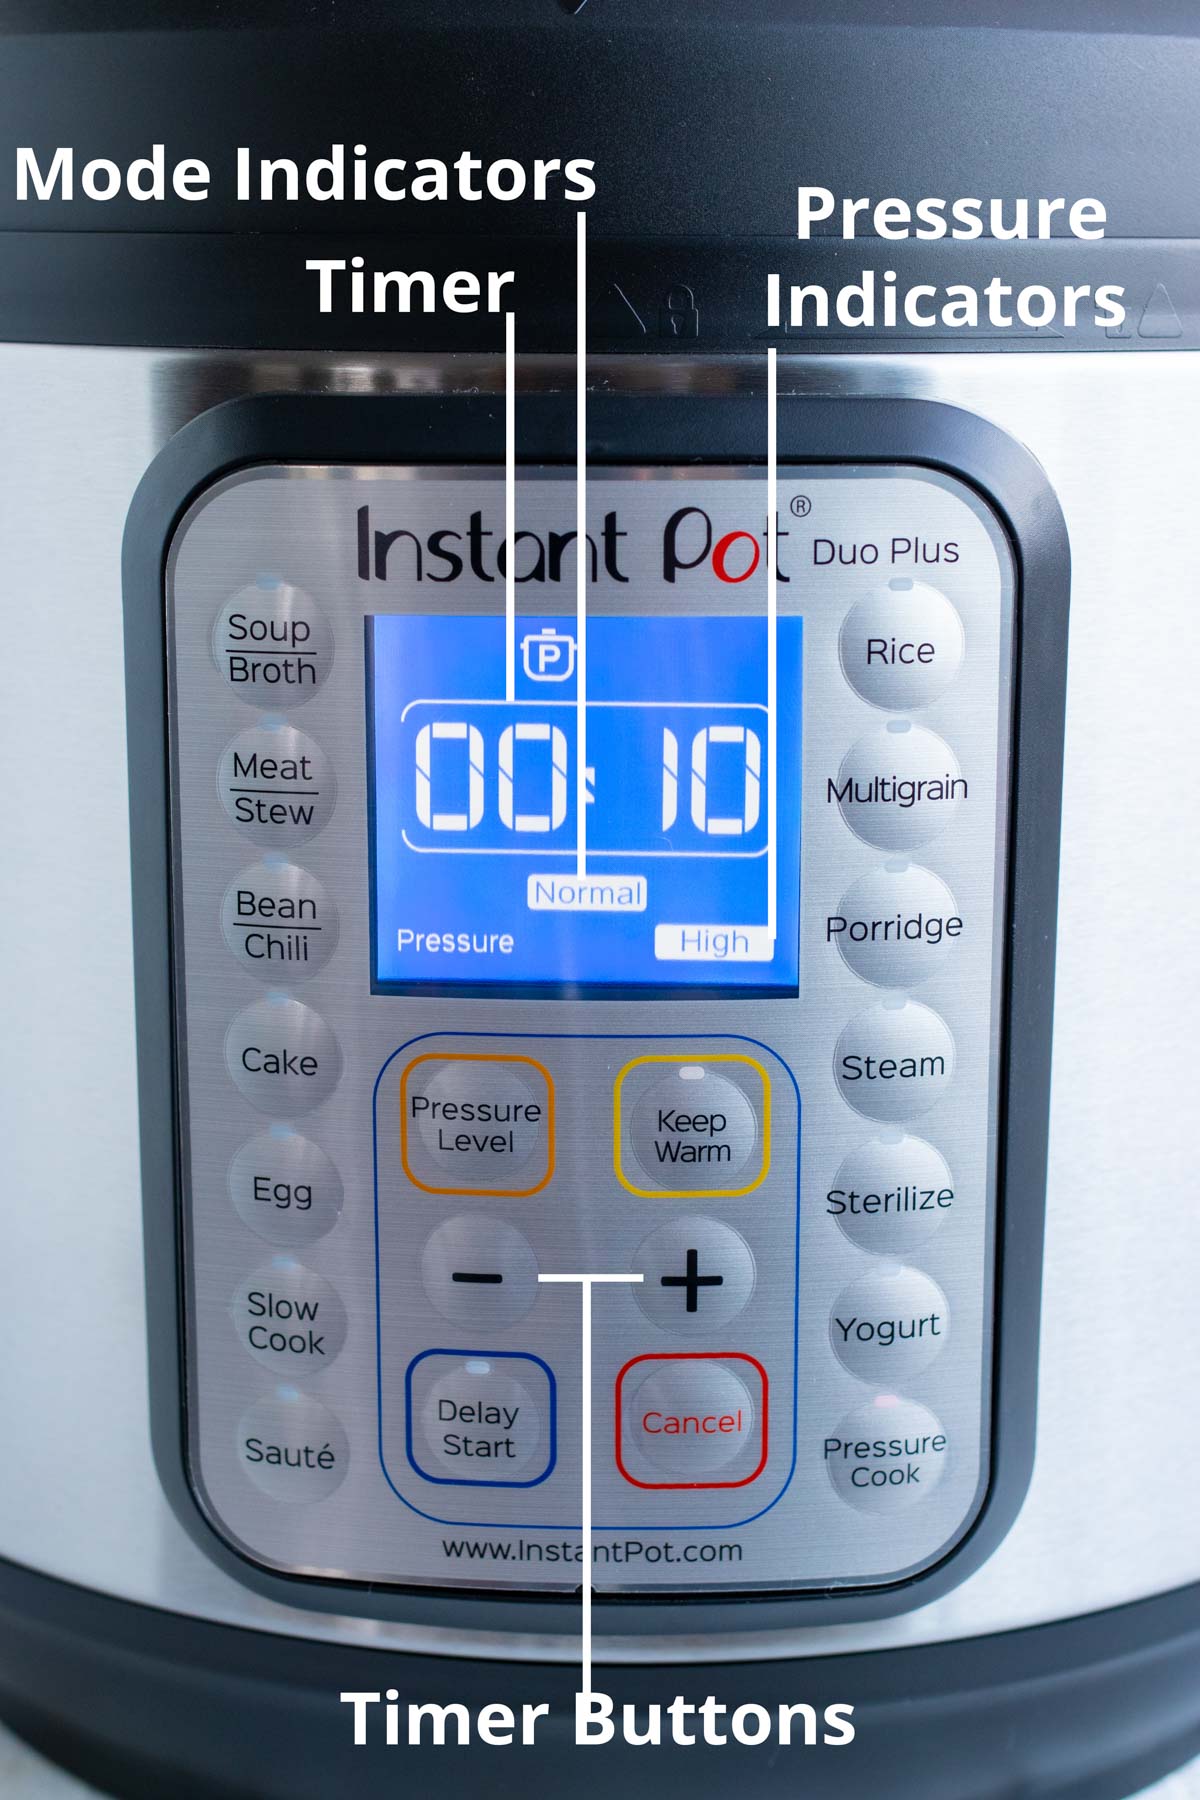 The LCD display and control panel of an Instant Pot showing the timer buttons, timer, mode indicators, and high or low pressure indicators.